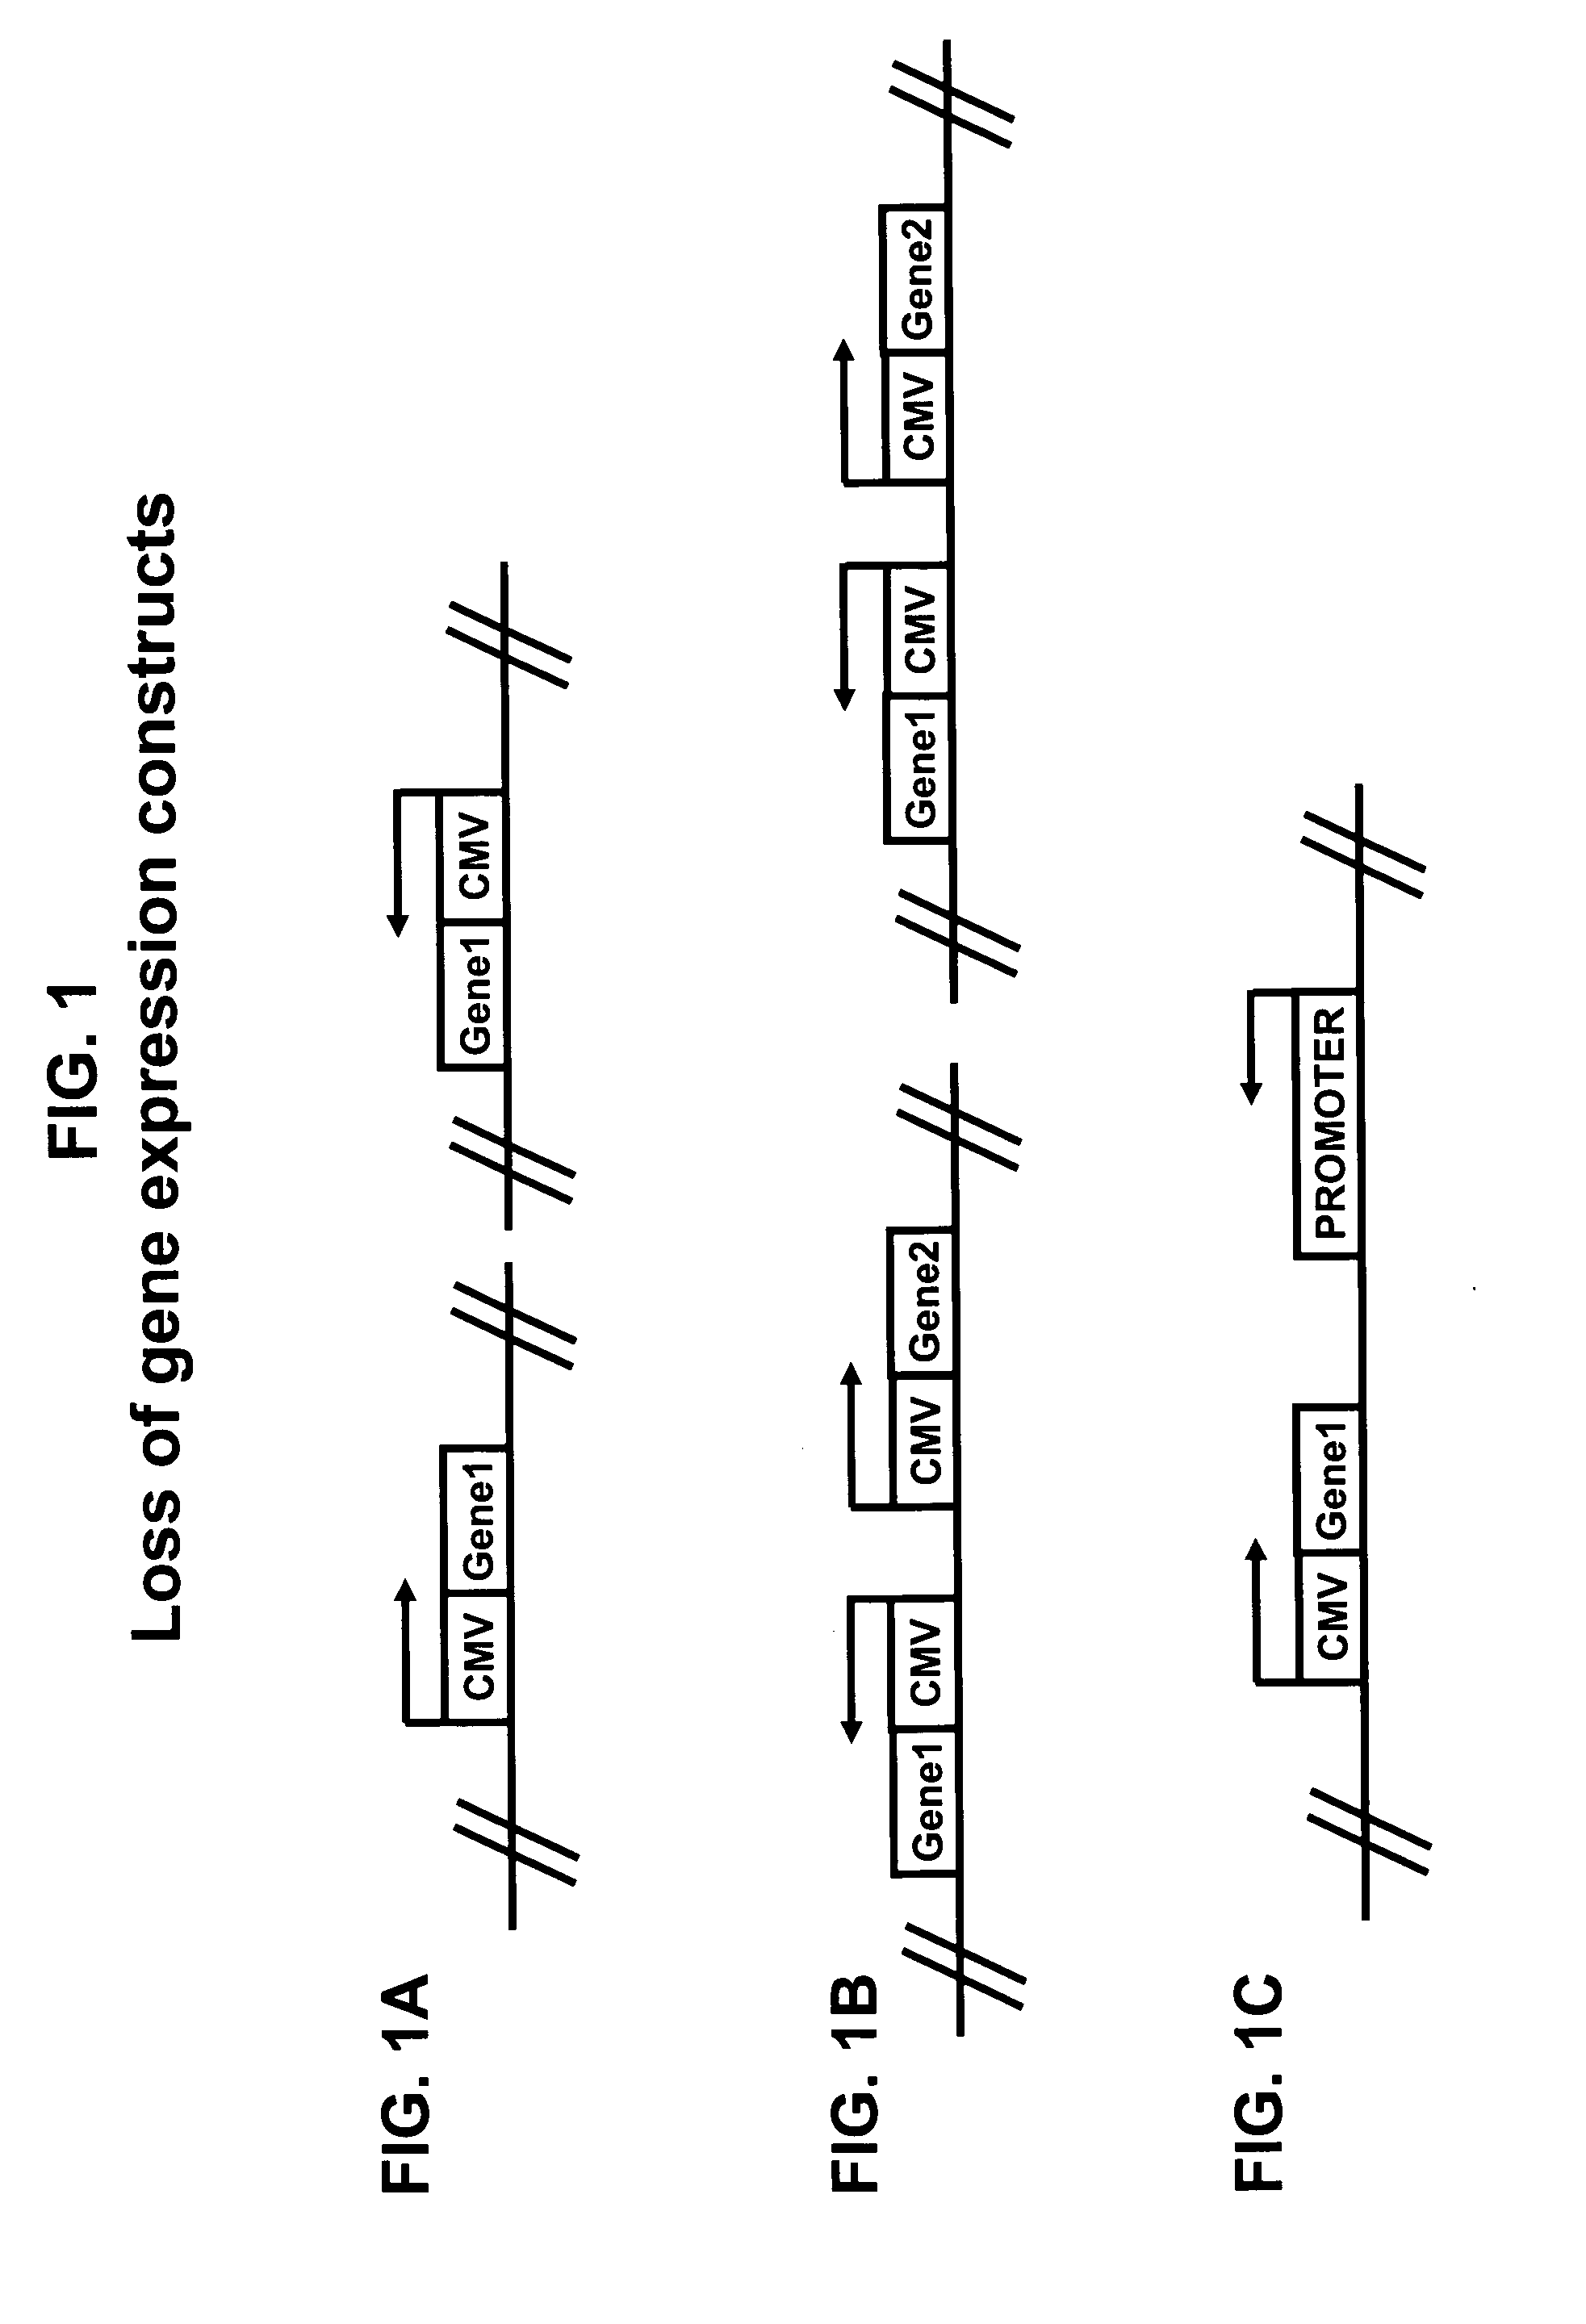 Method for improving protein production